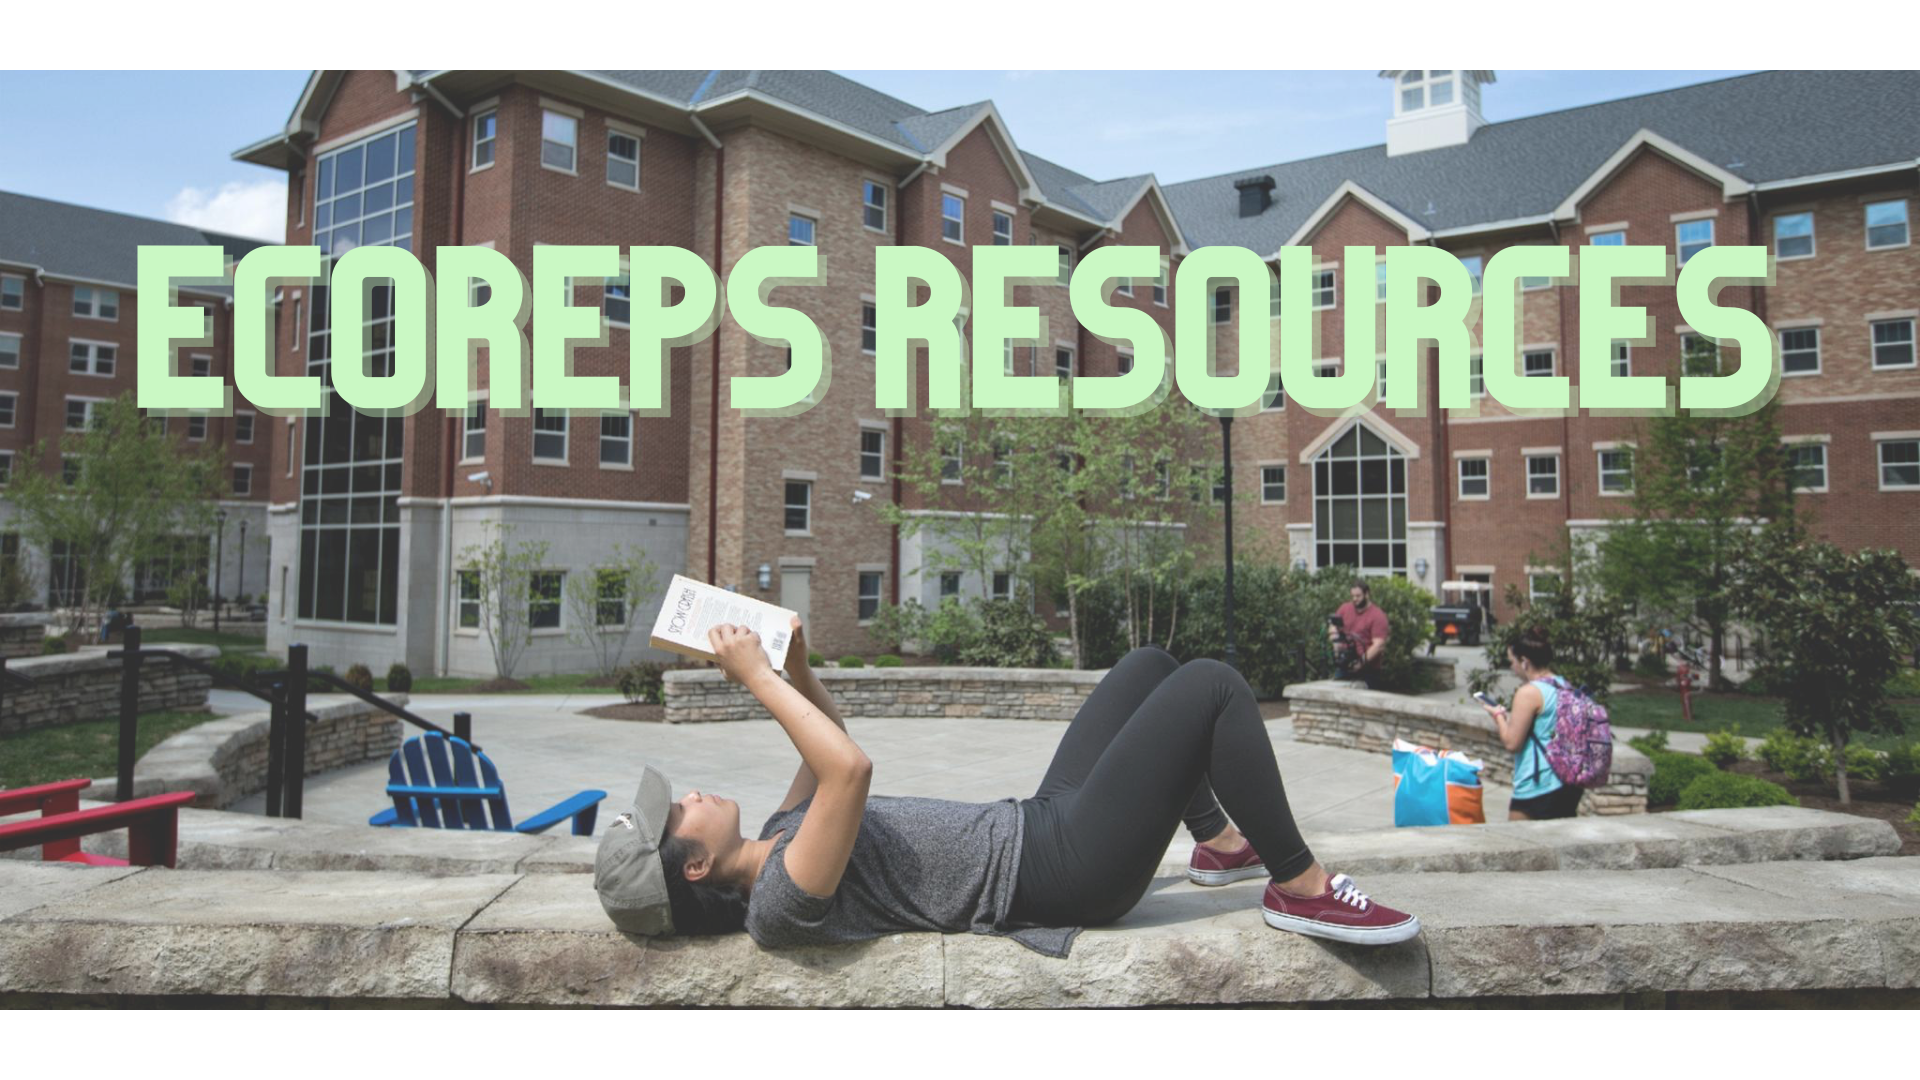 students outside on university of kentucky campus says ecoreps resources